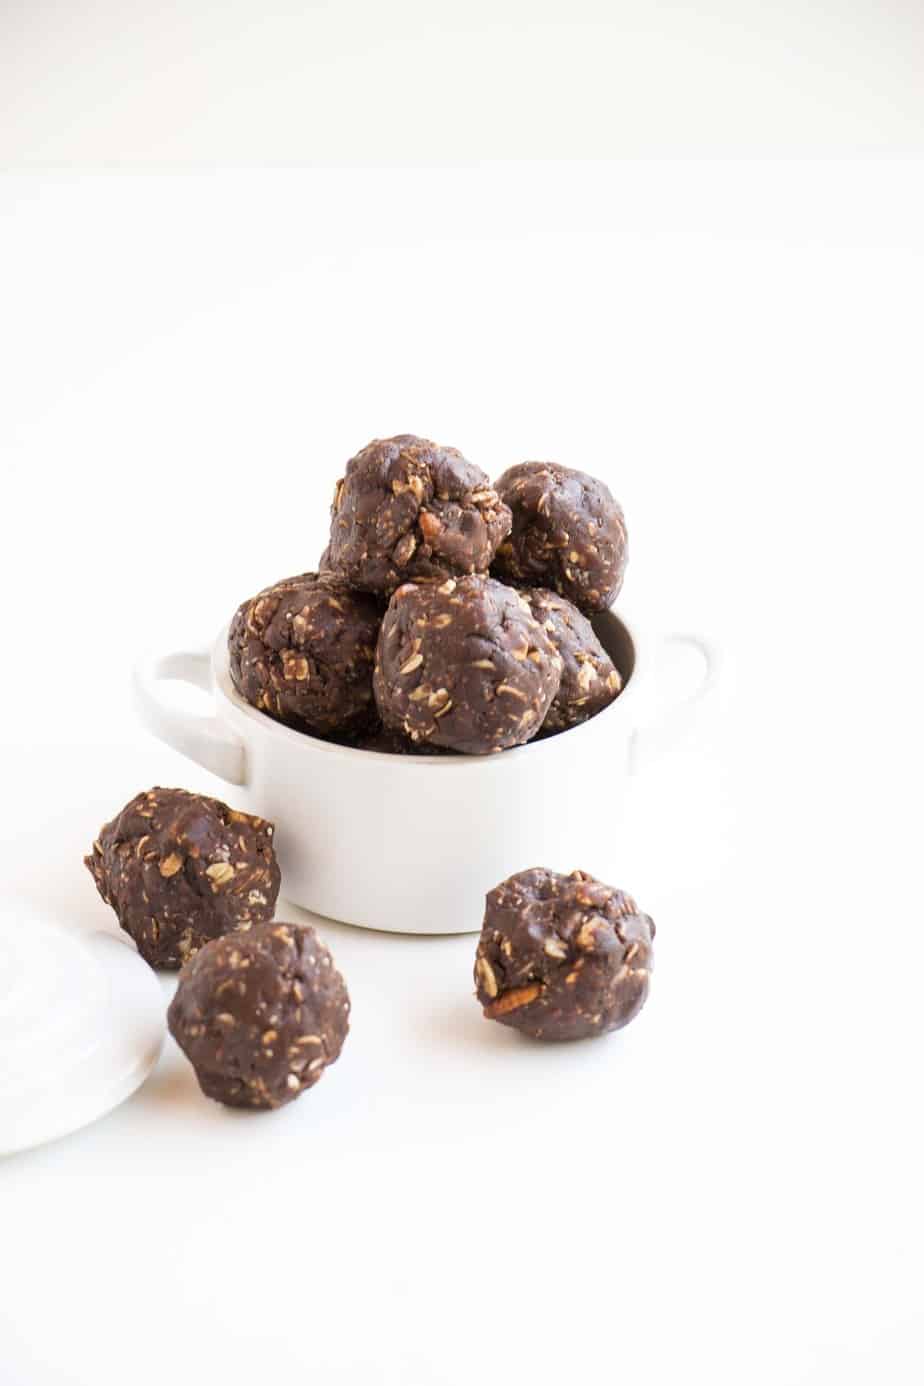 Nutty Chocolate Energy Balls in white bowl.